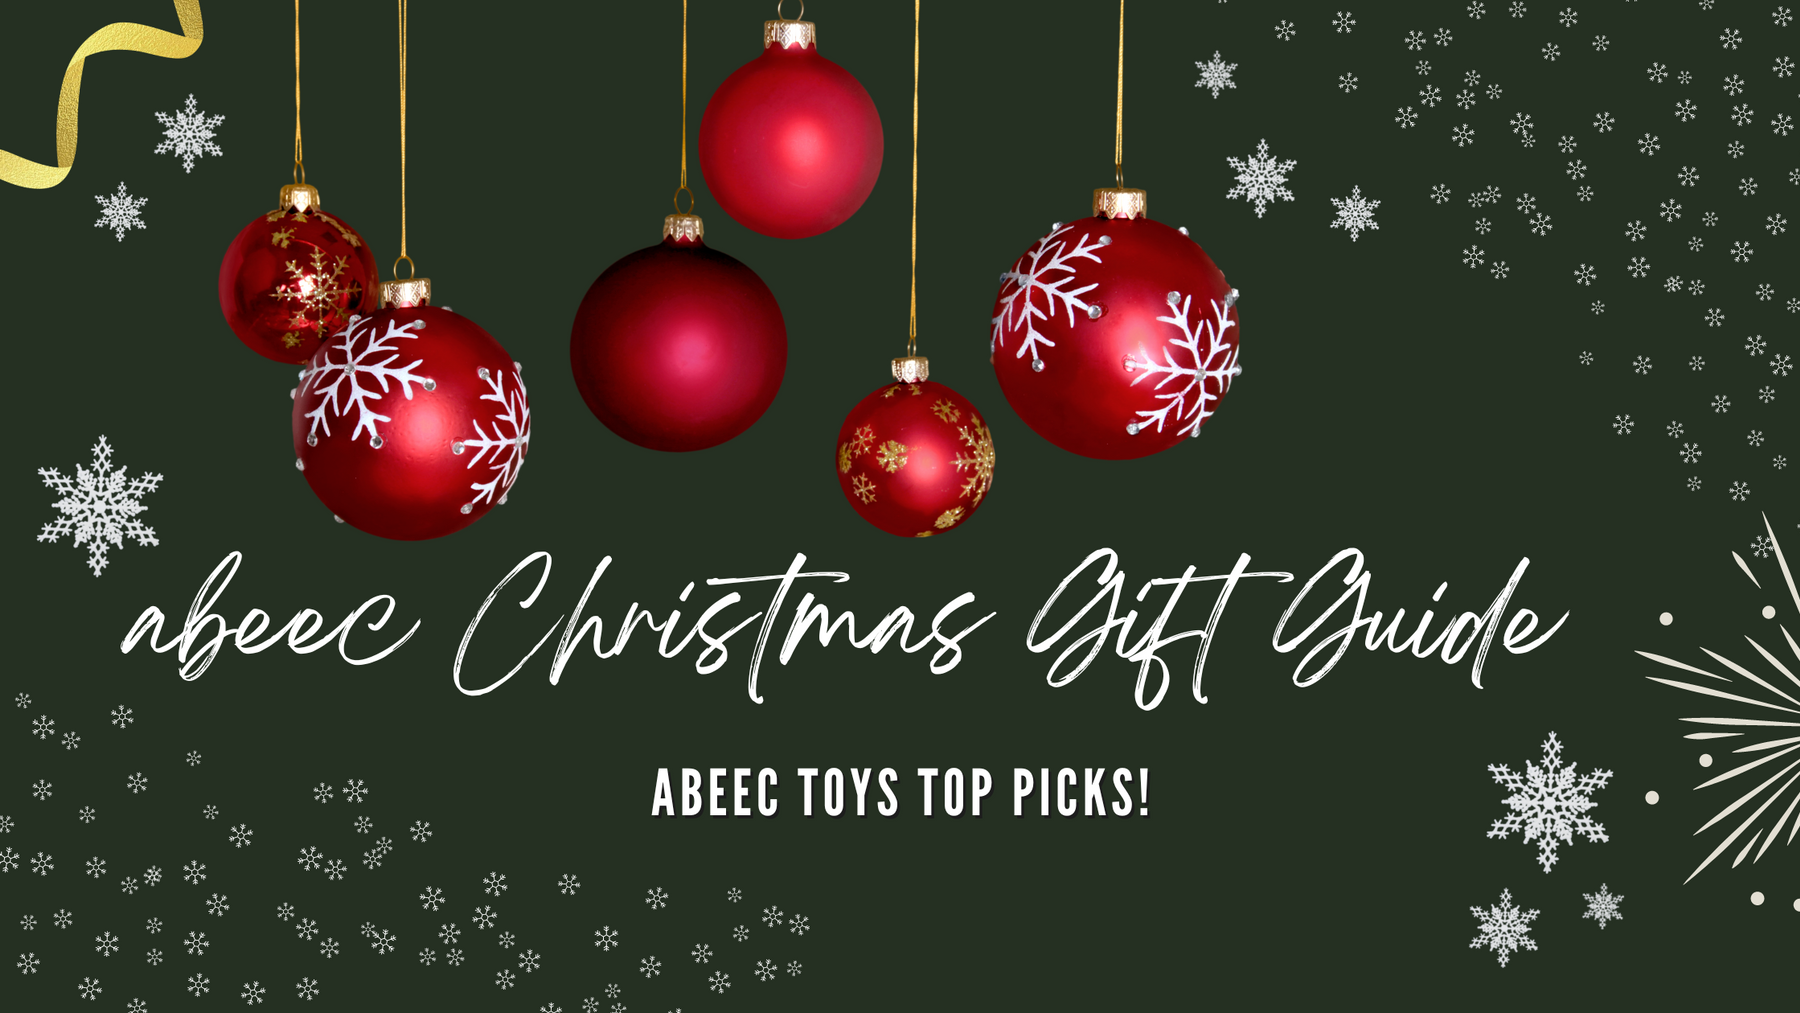 abeec Christmas Gift Guide - Our Top Picks!